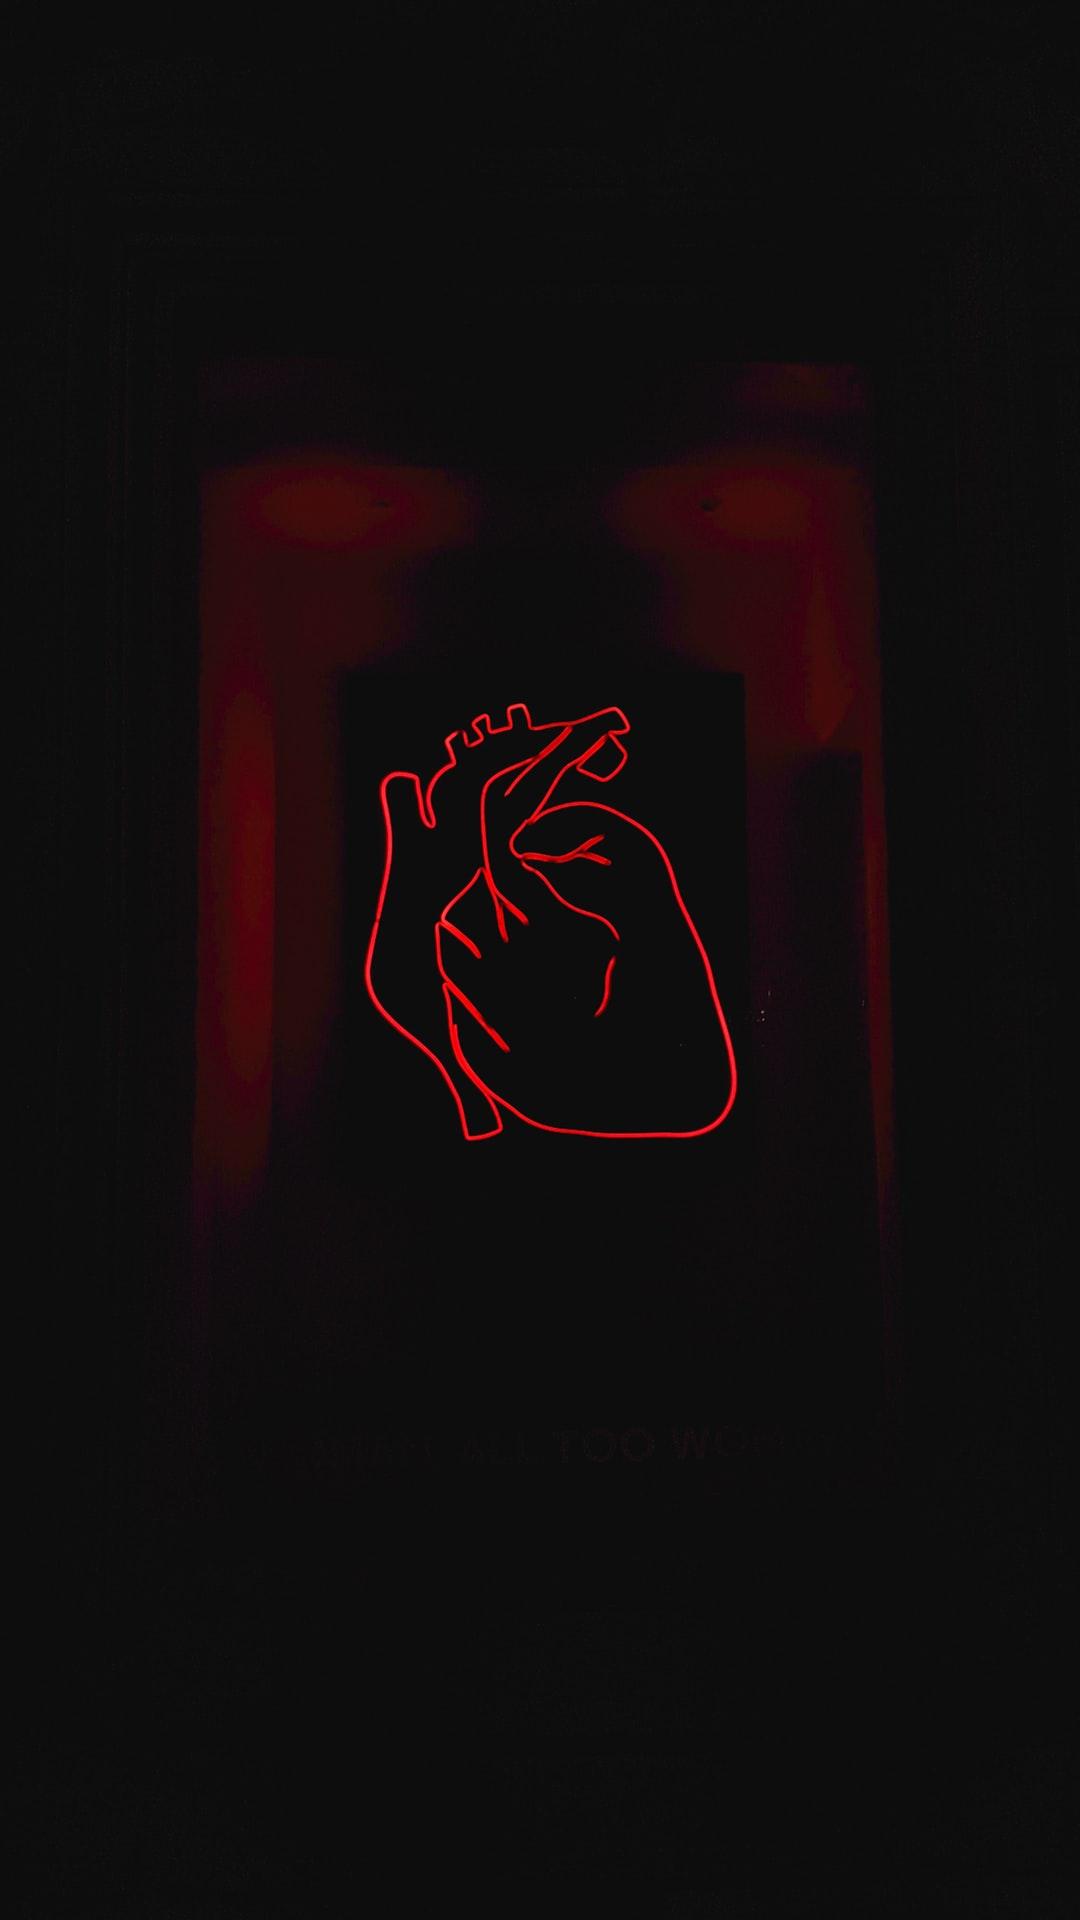 Neon Heart Picture. Download Free Image